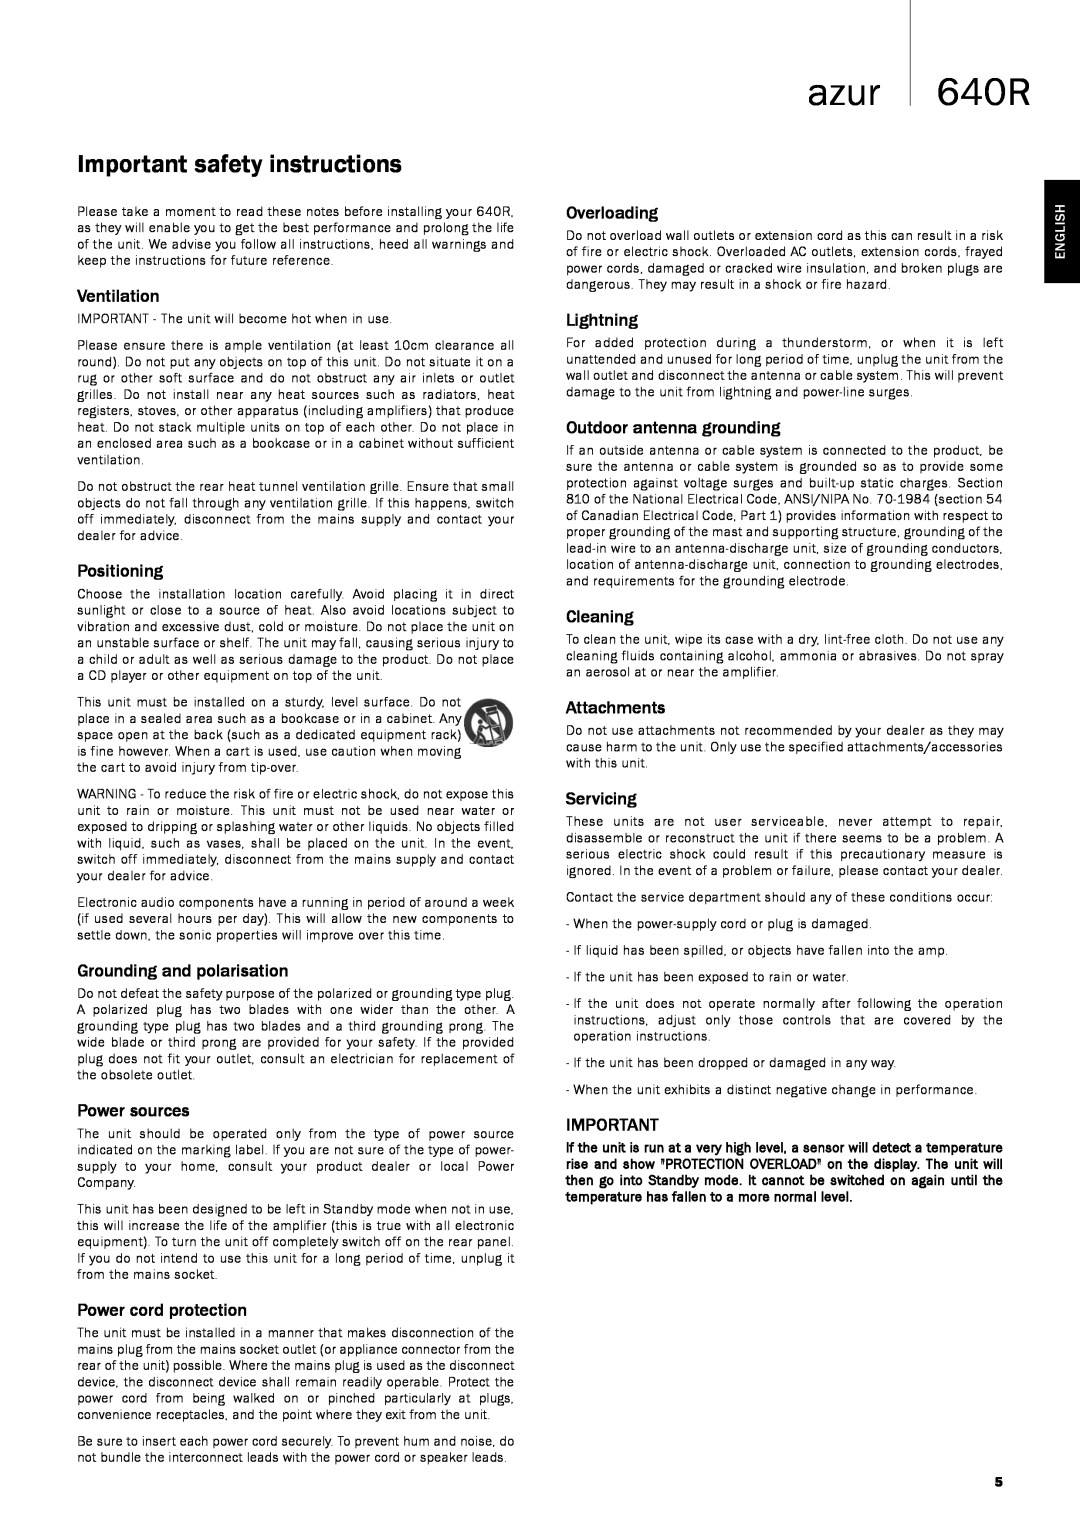 Cambridge Audio user manual Important safety instructions, azur 640R 